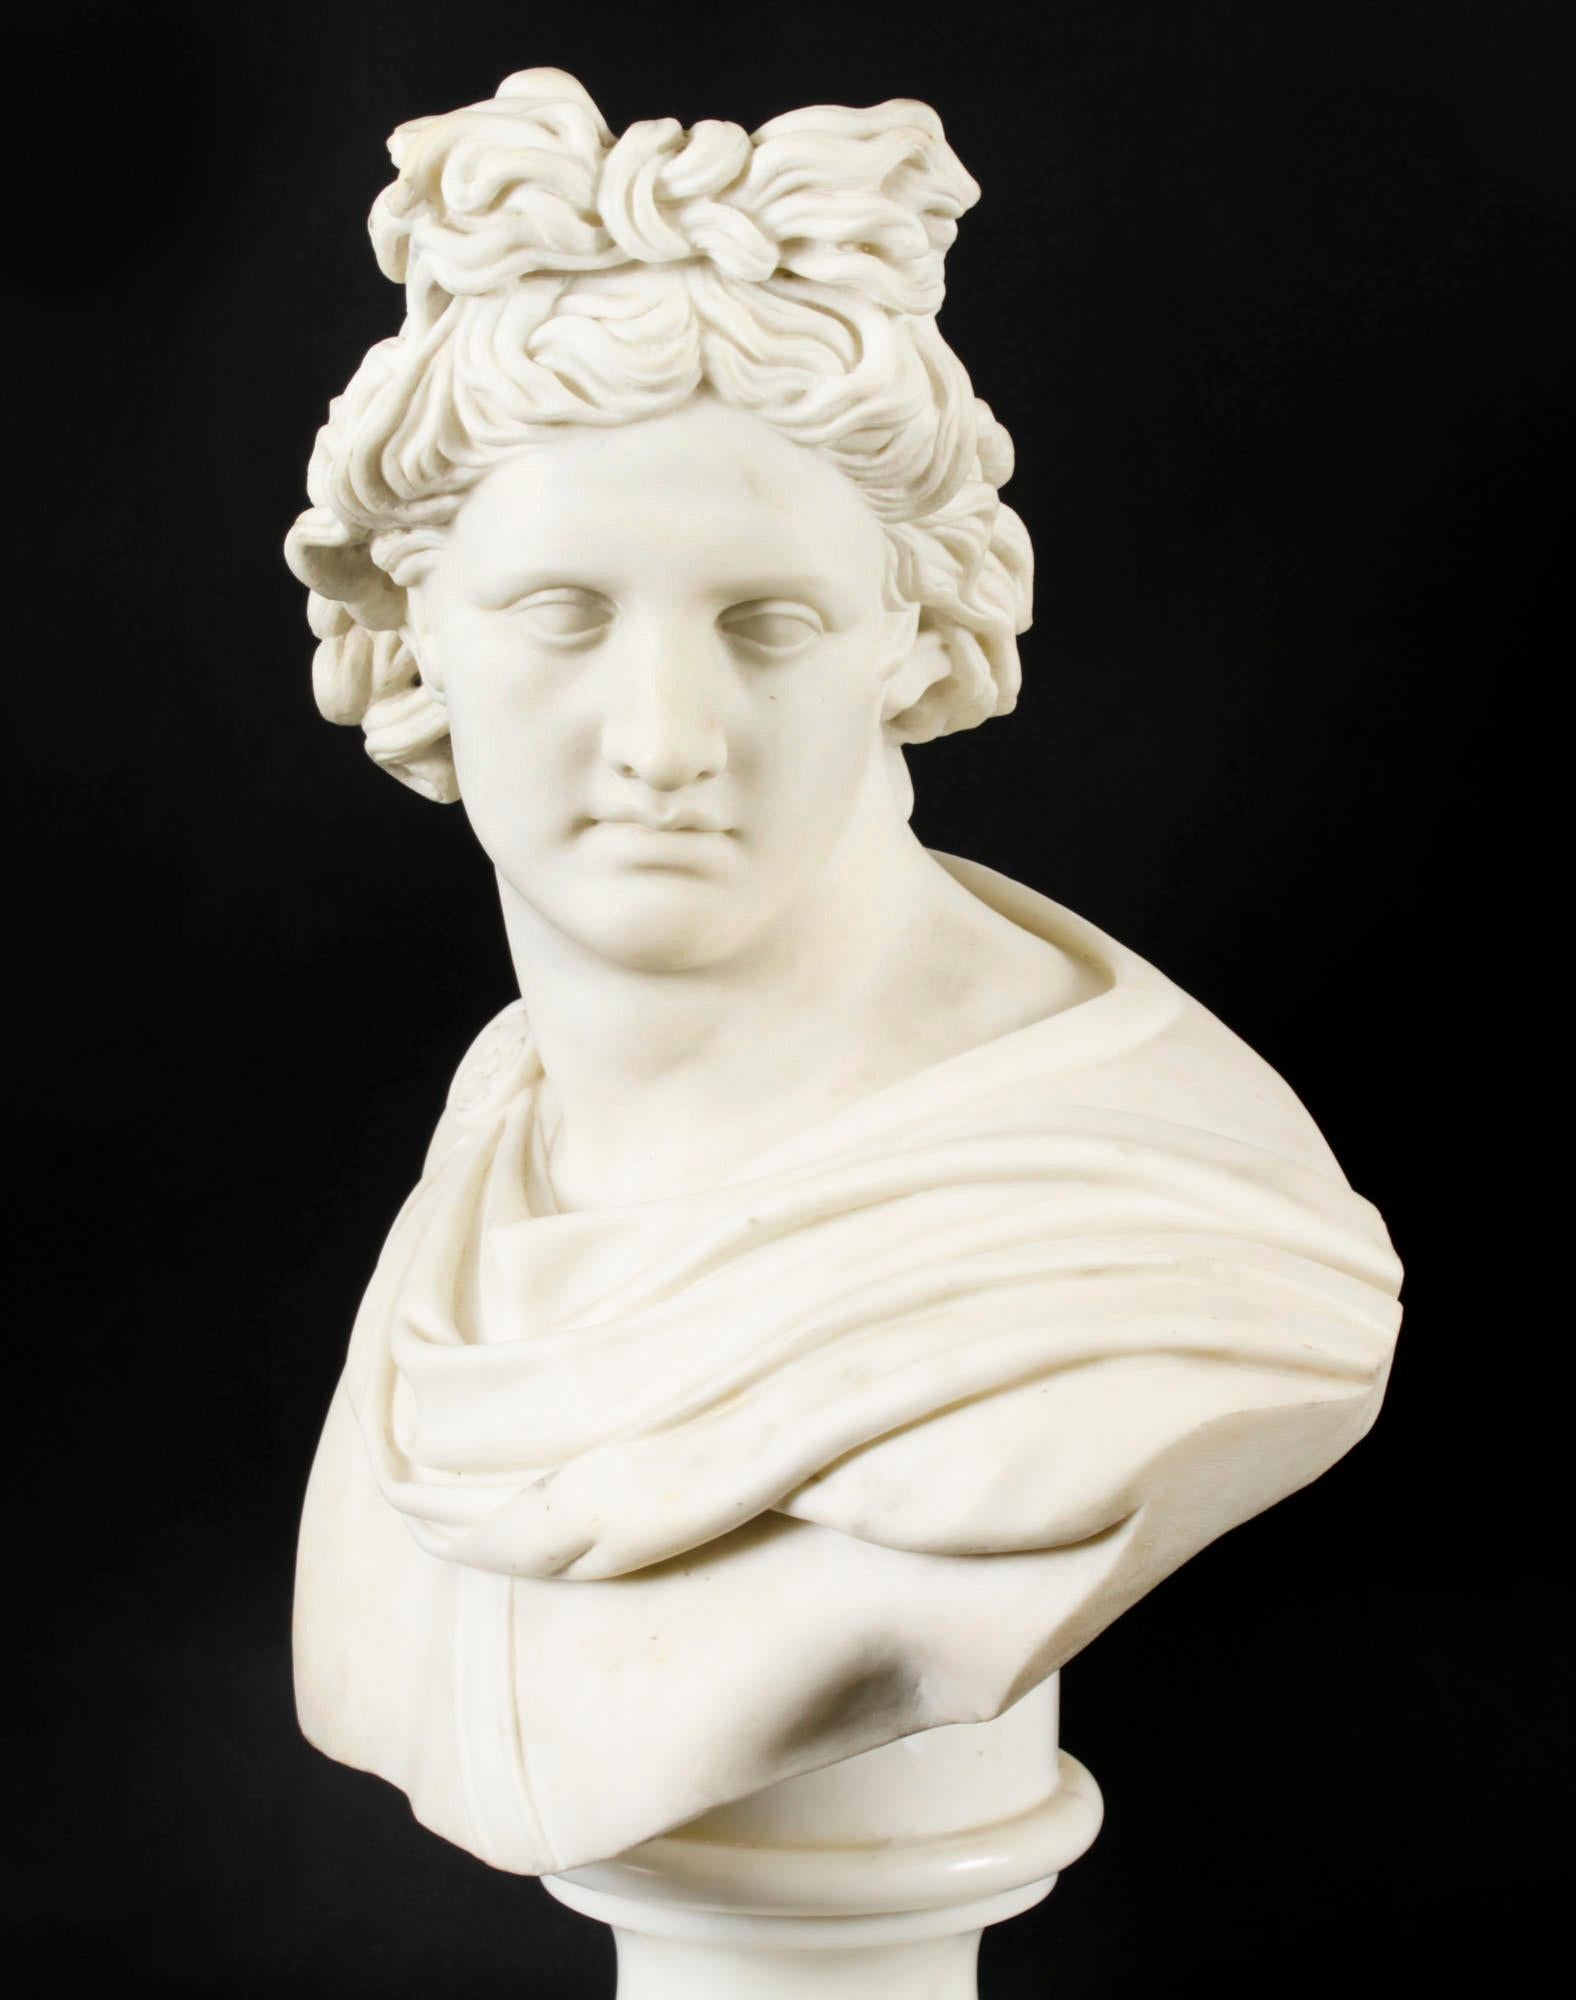 Antique Italian Marble Bust of Greek God Apollo Belvedere 19th Century For Sale 1